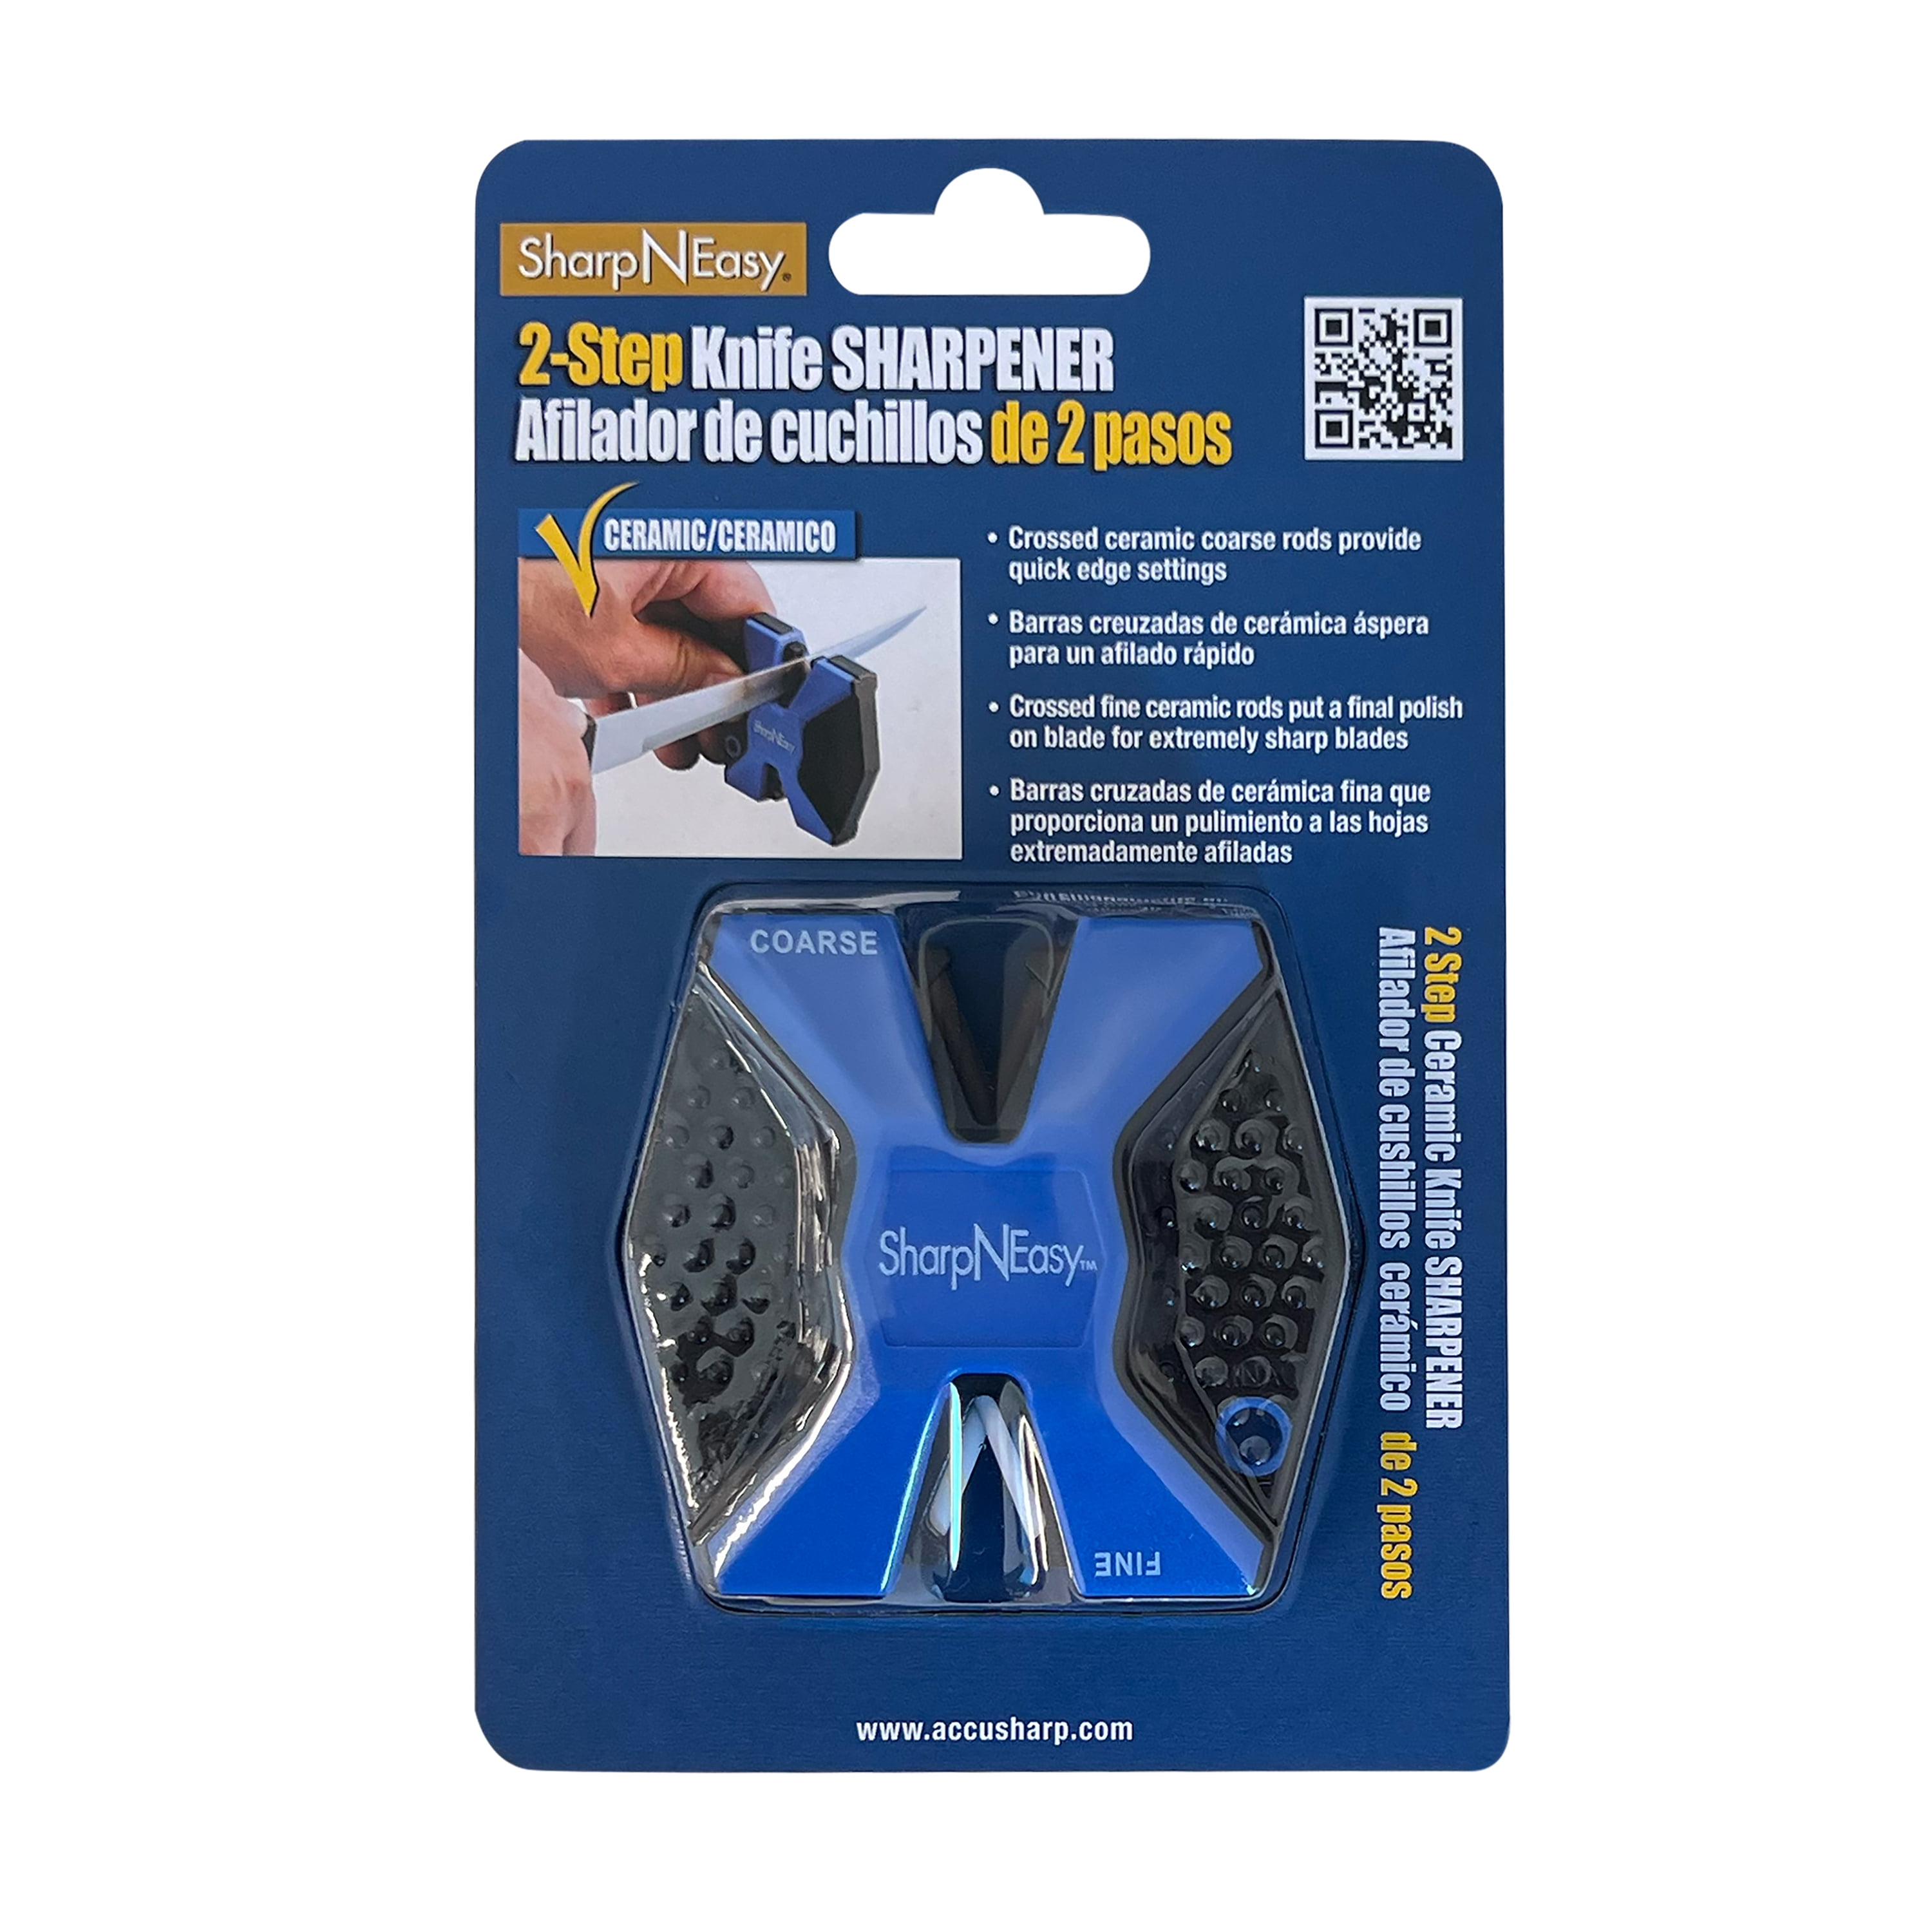  AccuSharp Diamond Pro 2-Step Knife Sharpener - Sharpens,  Restores, & Hones - 2-Step Coarse and Fine Rods for Kitchen Knives & All  Types of Blades - Keychain Pull Through Knife Sharpener 